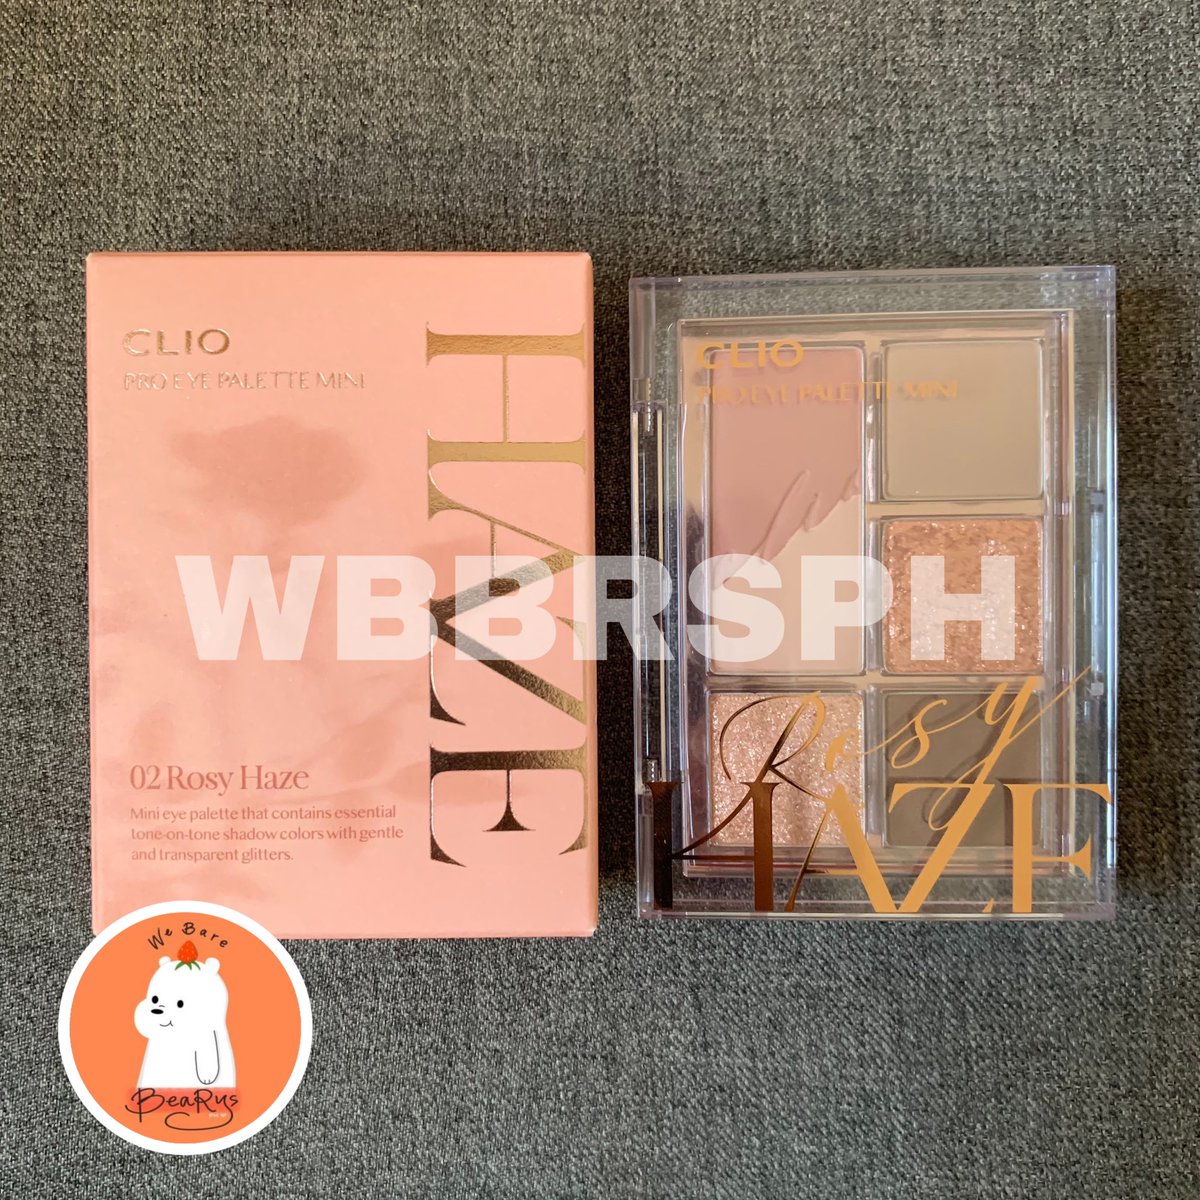  #WBBRSPH_Onhand CLIO MINI EYESHADOW PALETTE (NO POB PC)₱650- Rosy Haze version- Unopened- In great condition- NO POB PC- 4 stocks